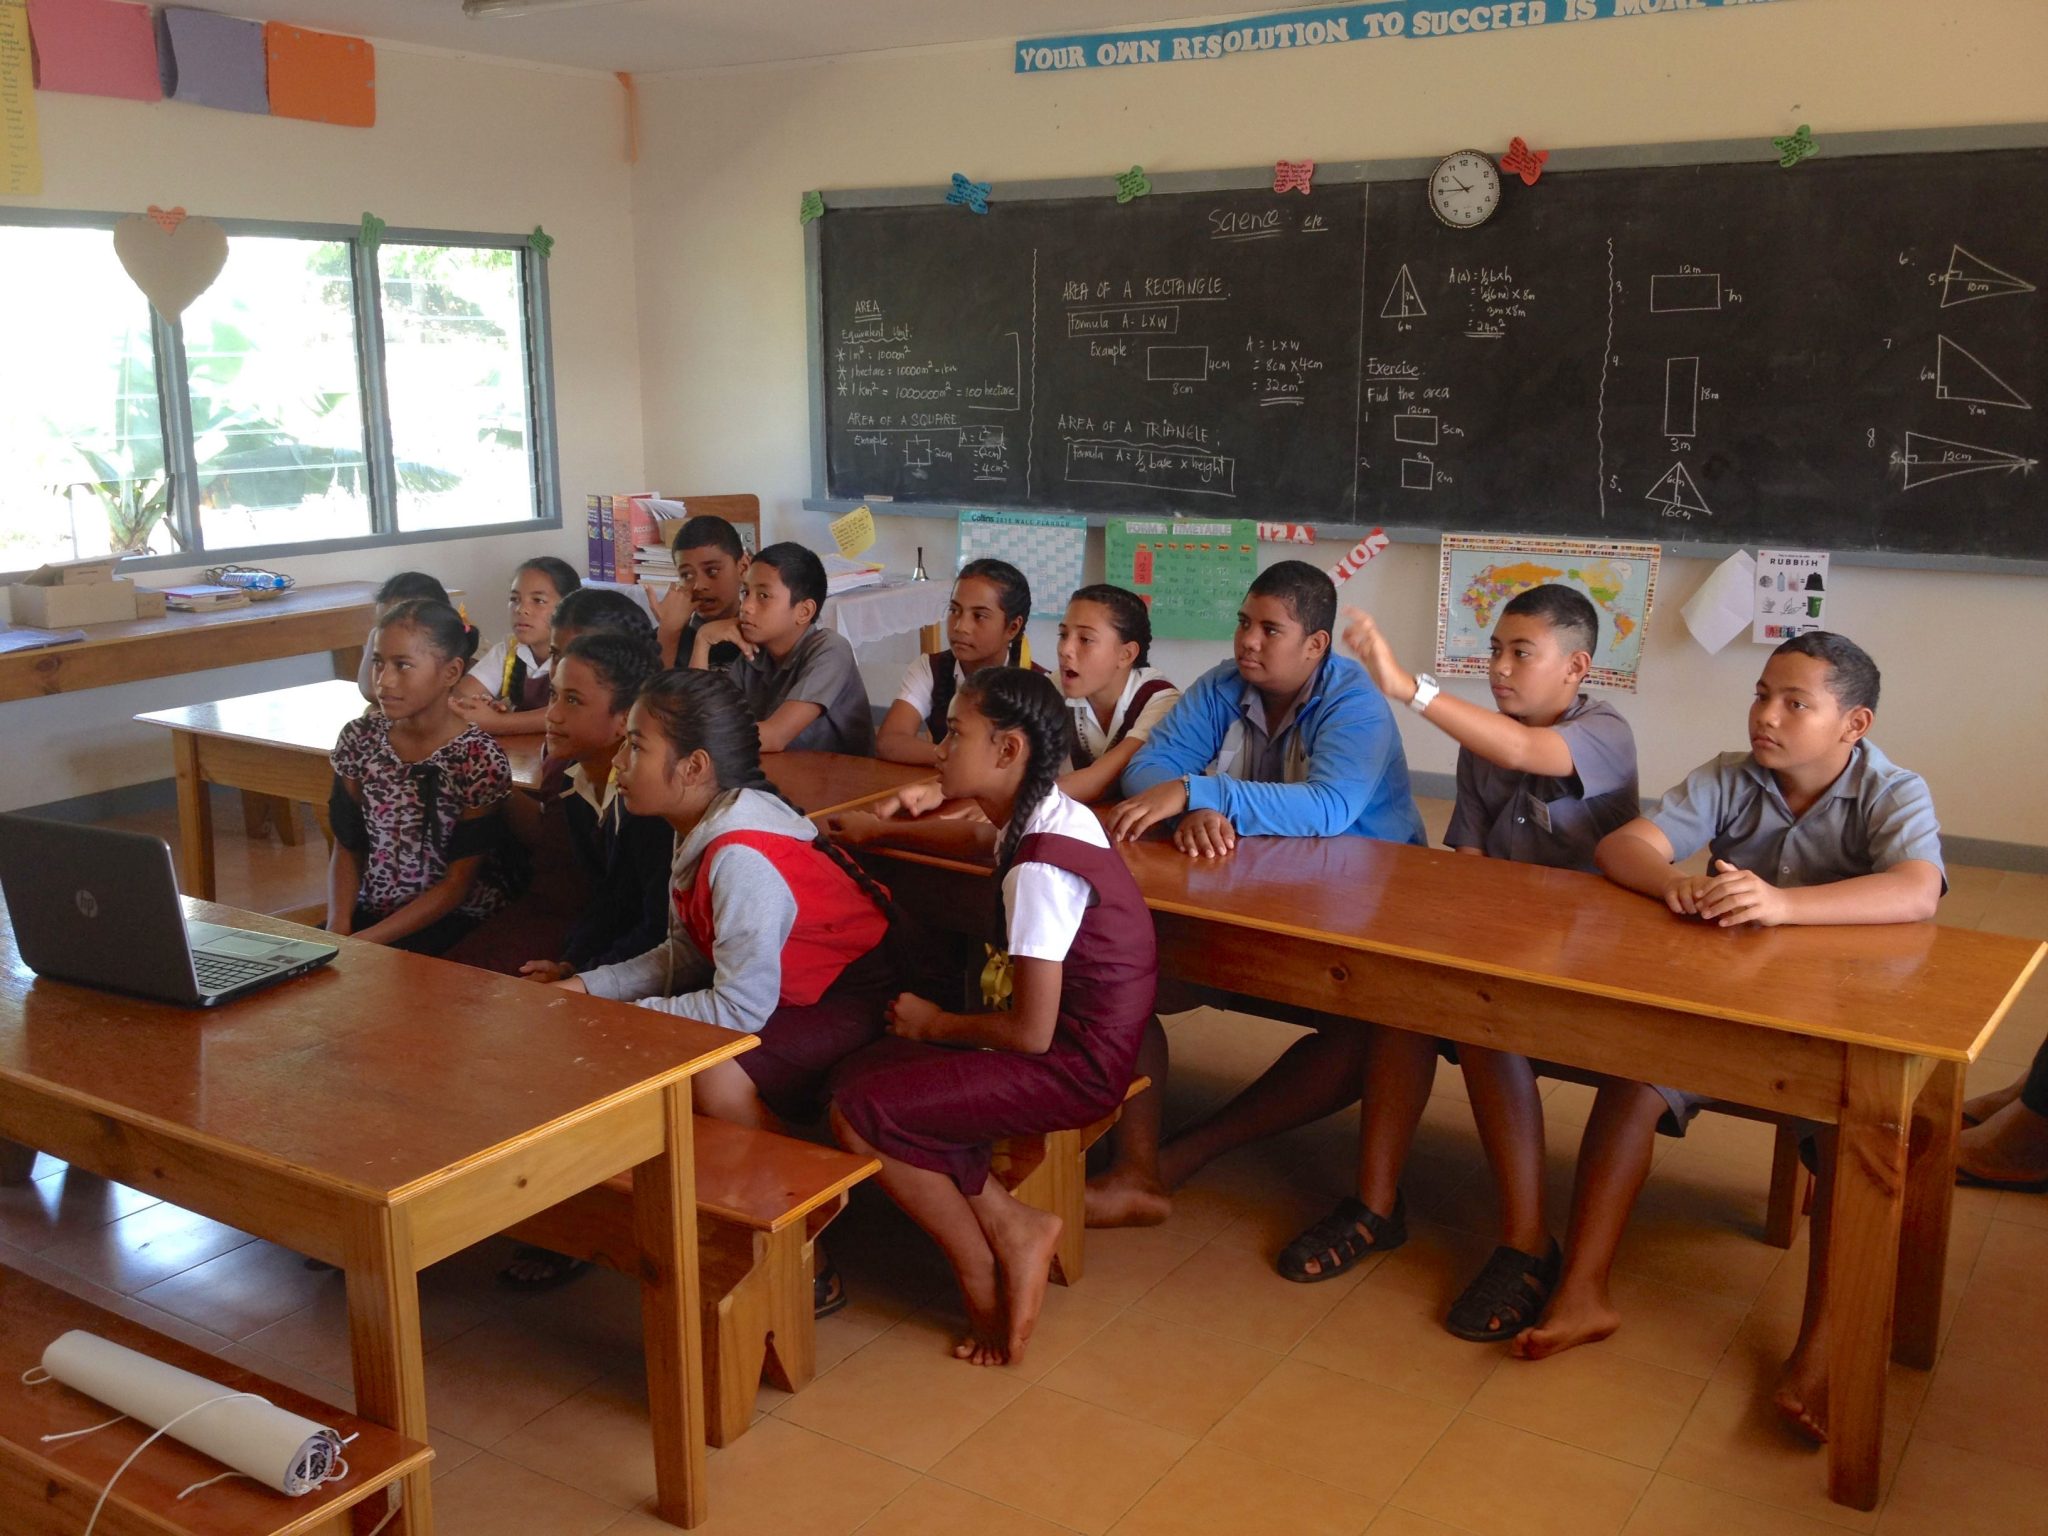 120. Skype - Students from the Vava'u Side School were eager to speak to the Round Hill Elementary School students